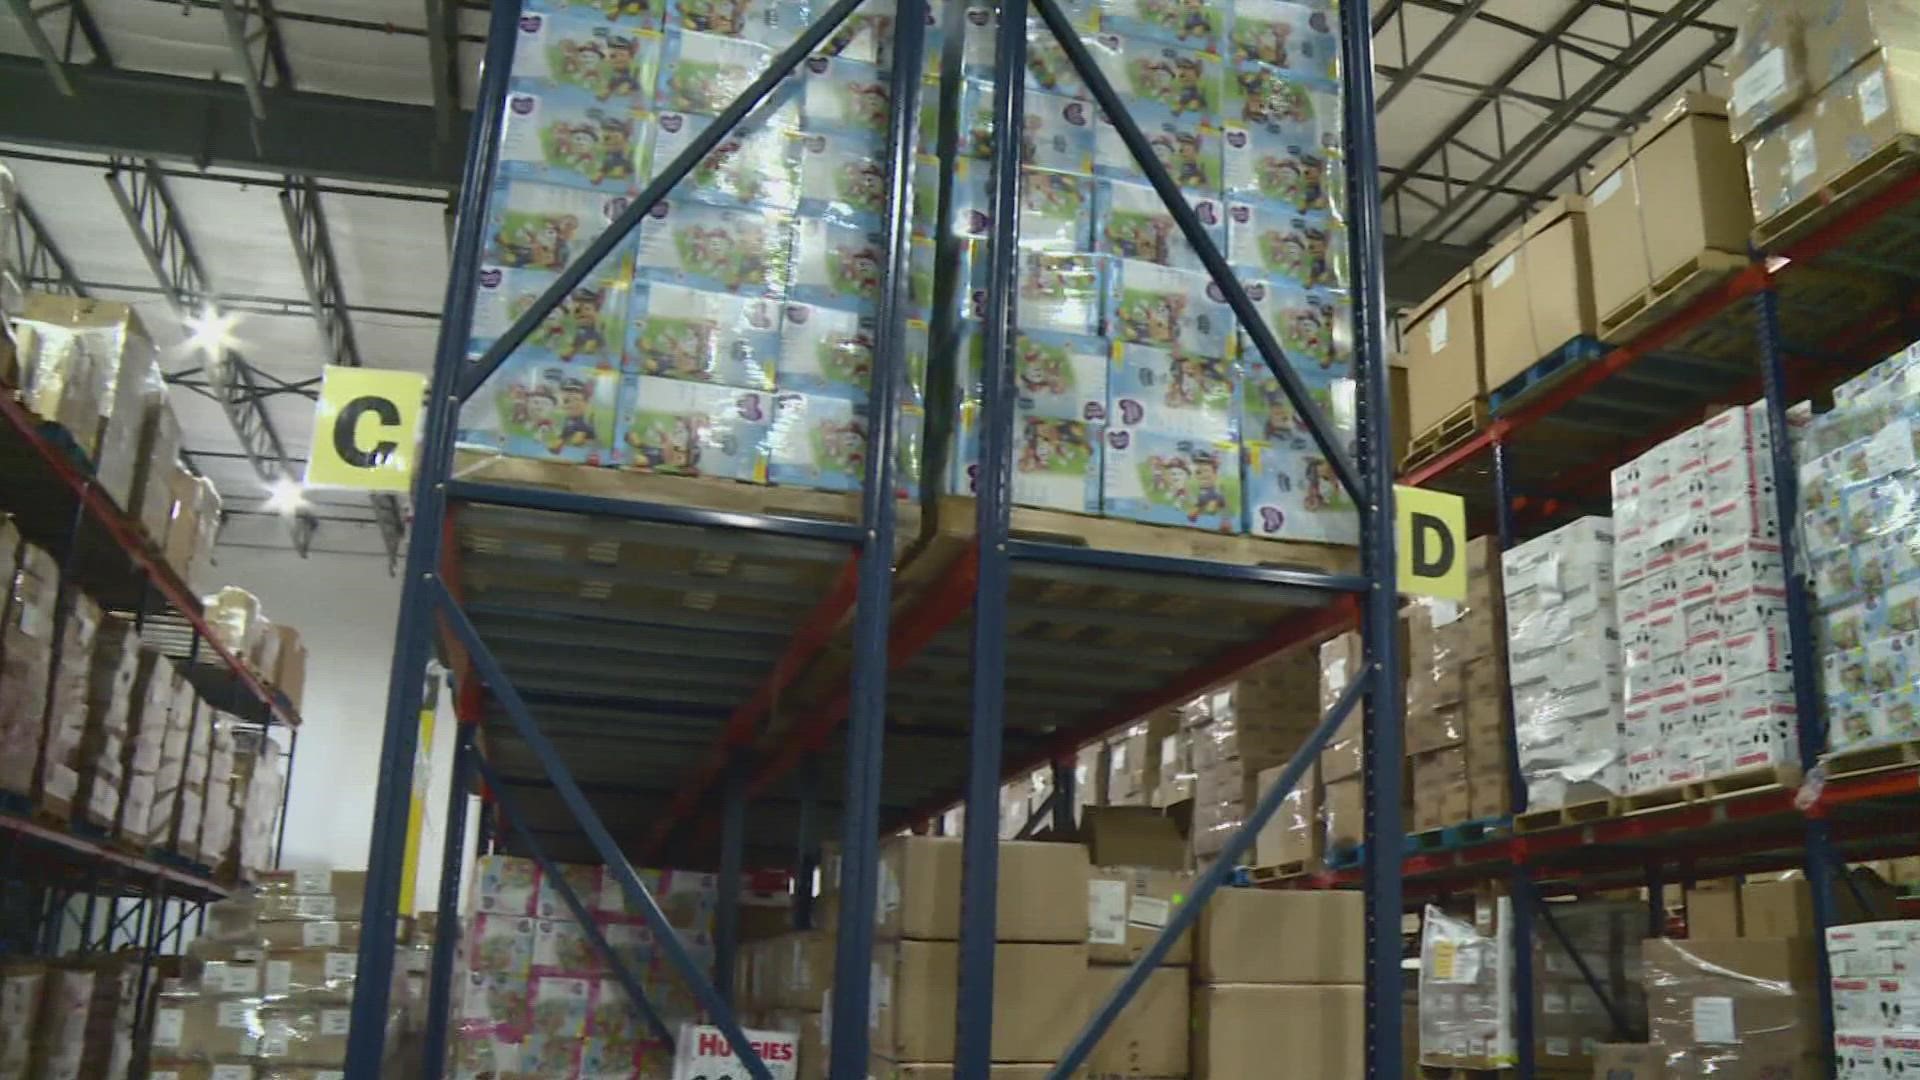 This week is National Diaper Needs Awareness Week and the largest diaper bank in San Antonio is asking for help.